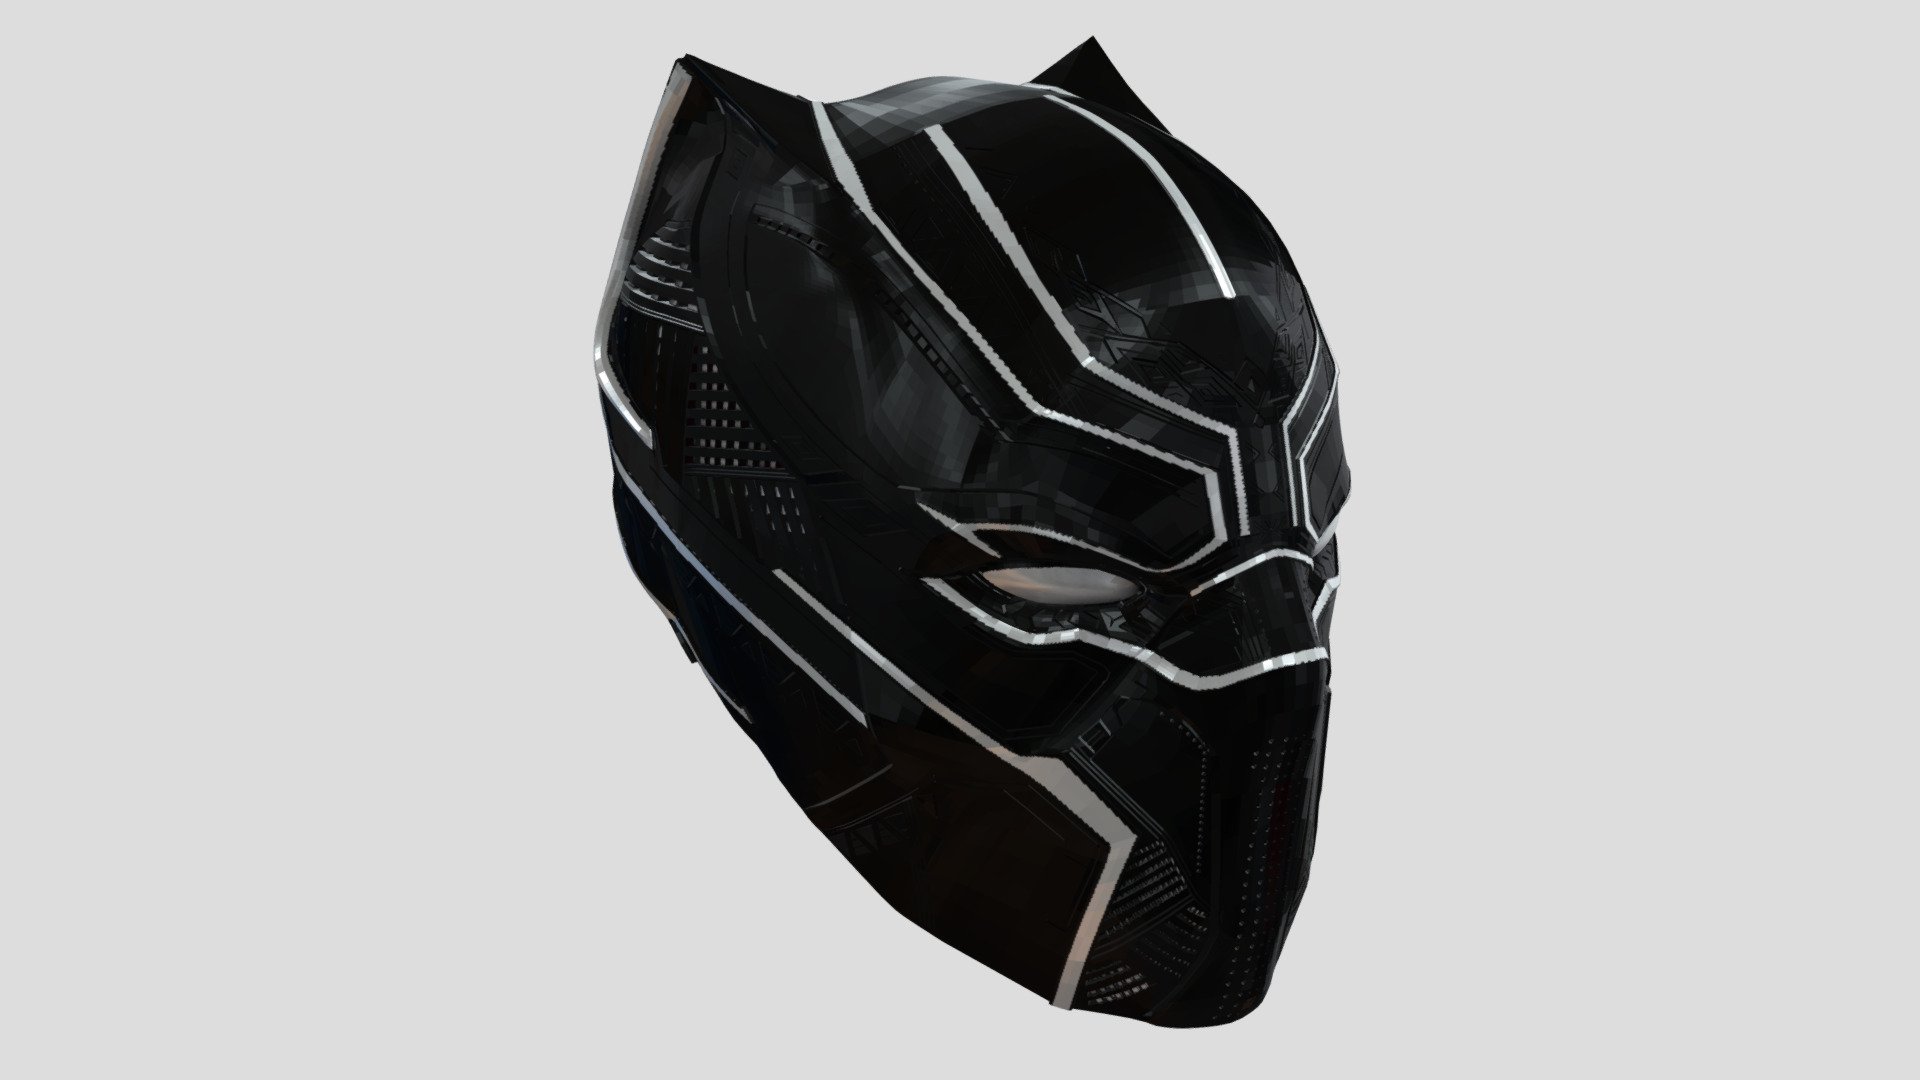 Black Panther helmet - Download Free 3D model by atomicwest (@atomicwest)  [cdee410]